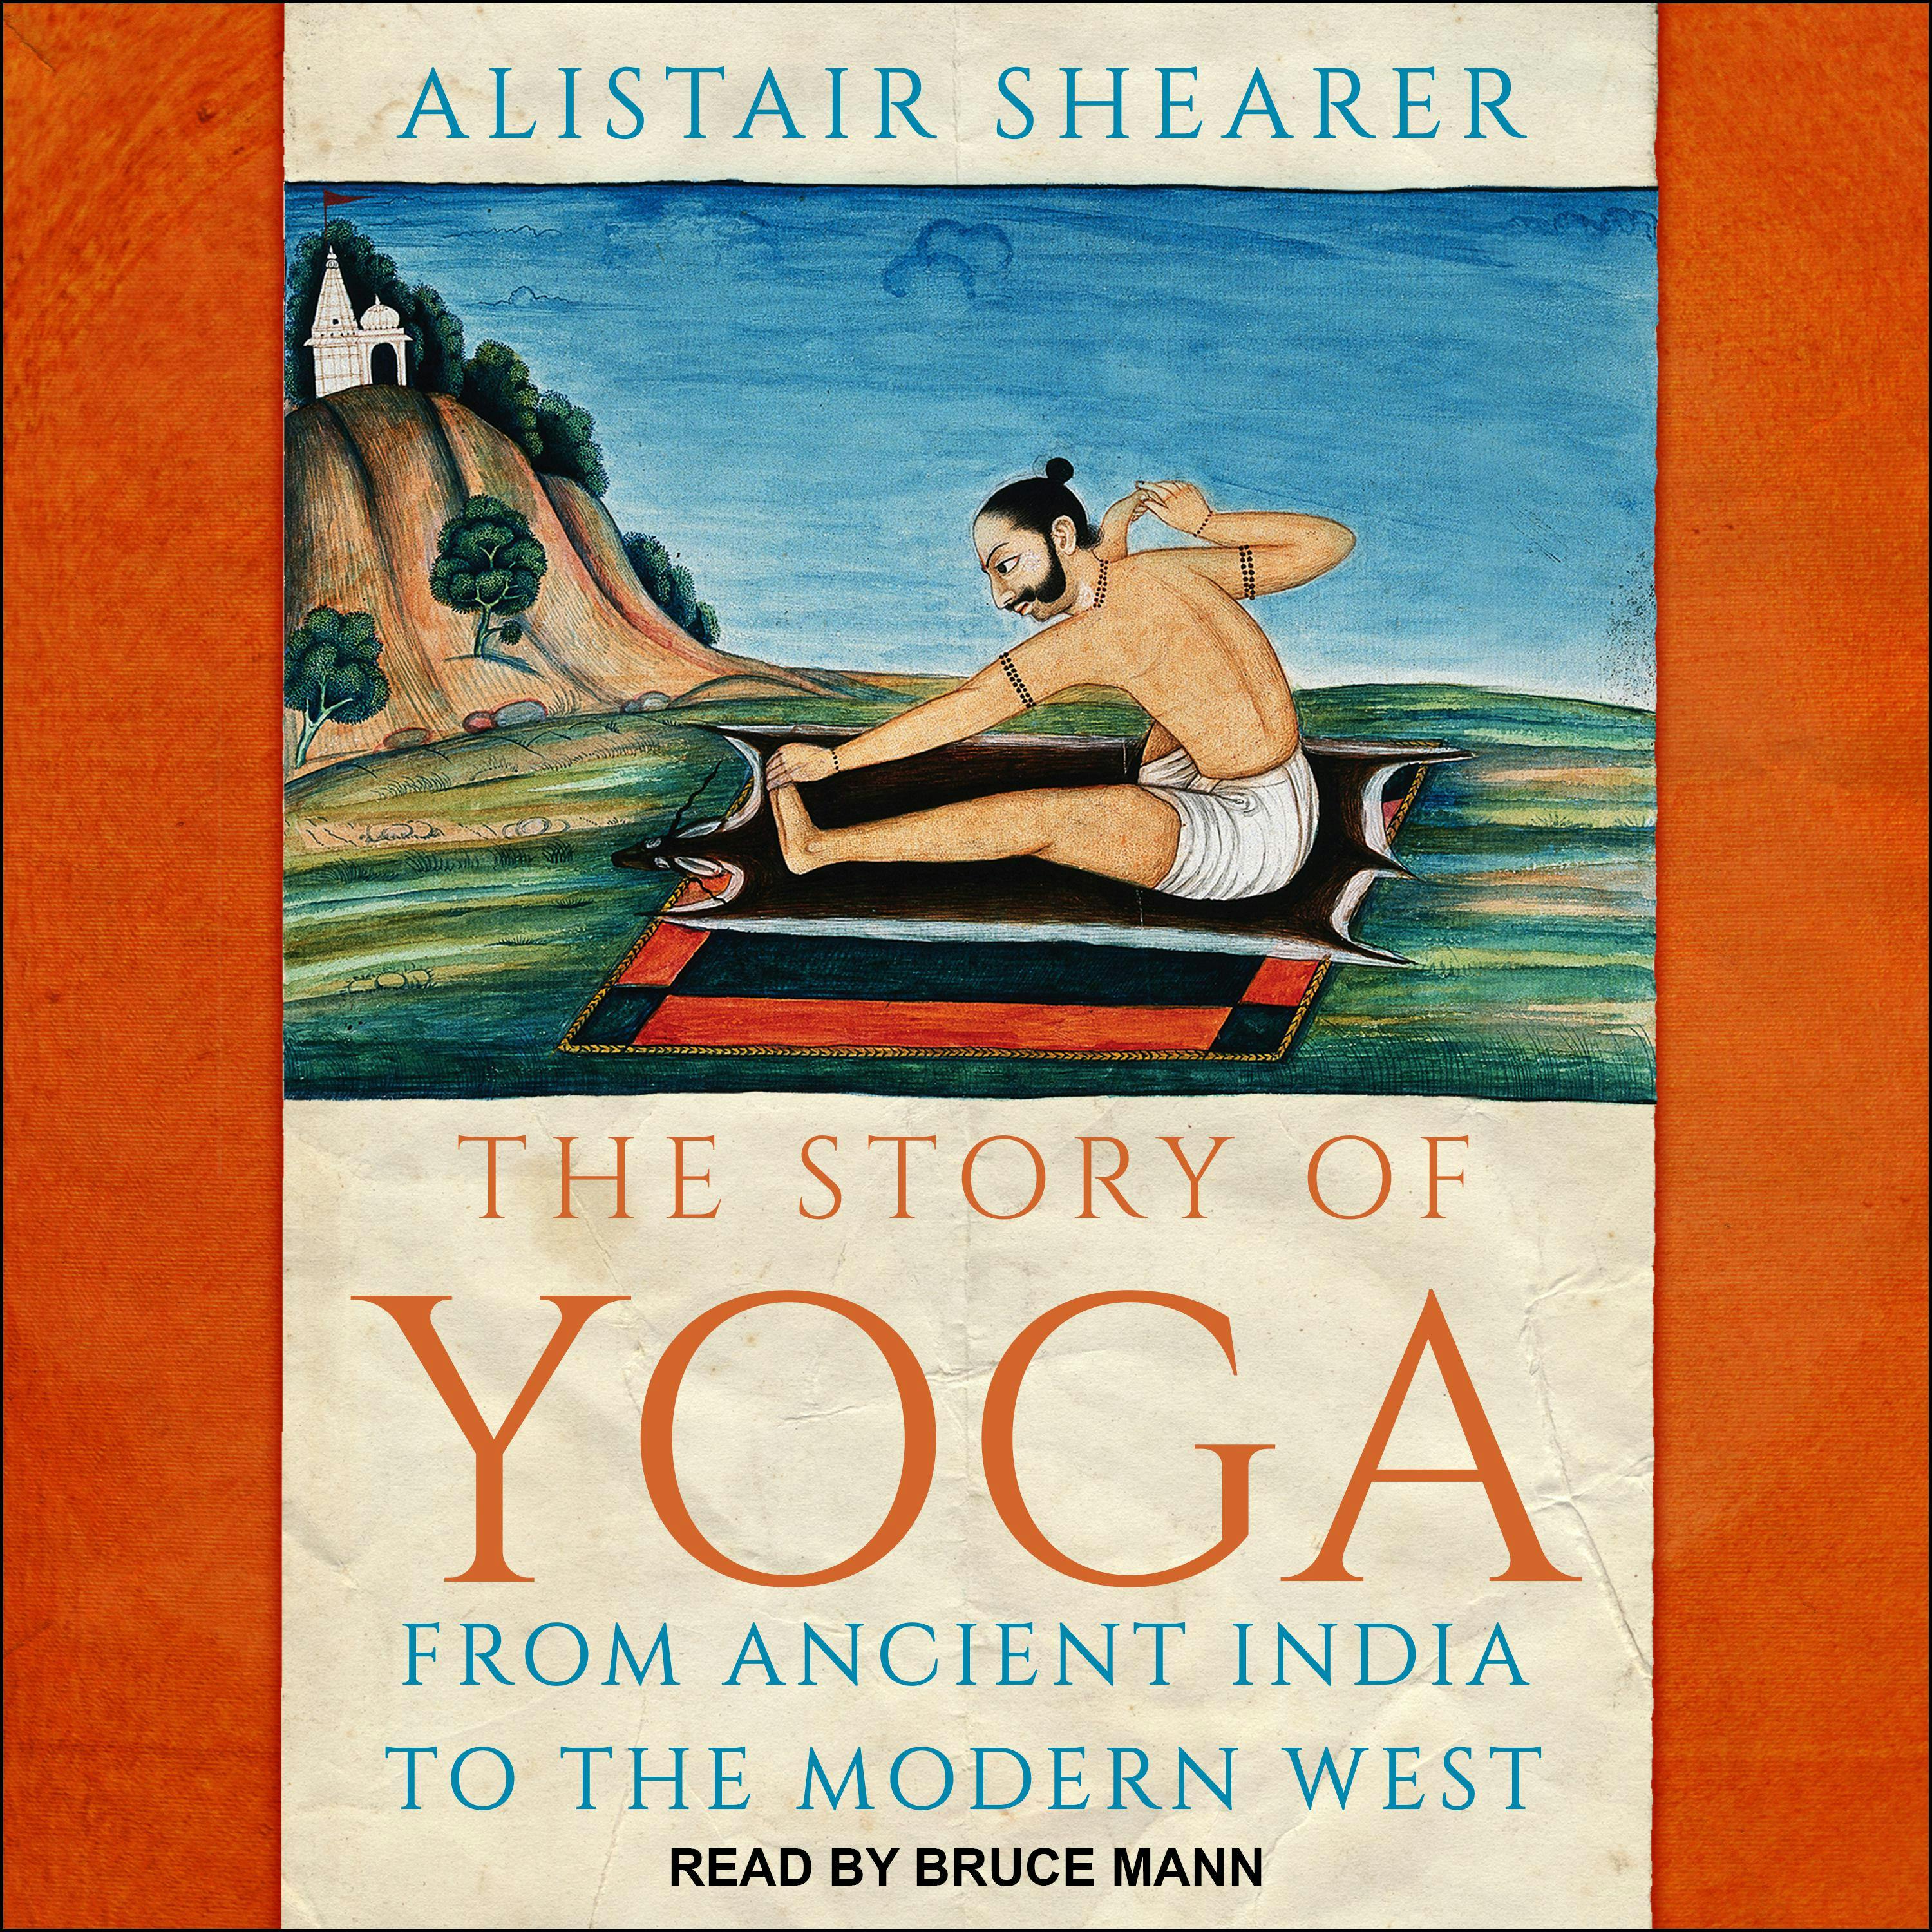 The Story of Yoga: From Ancient India to the Modern West - Alistair Shearer